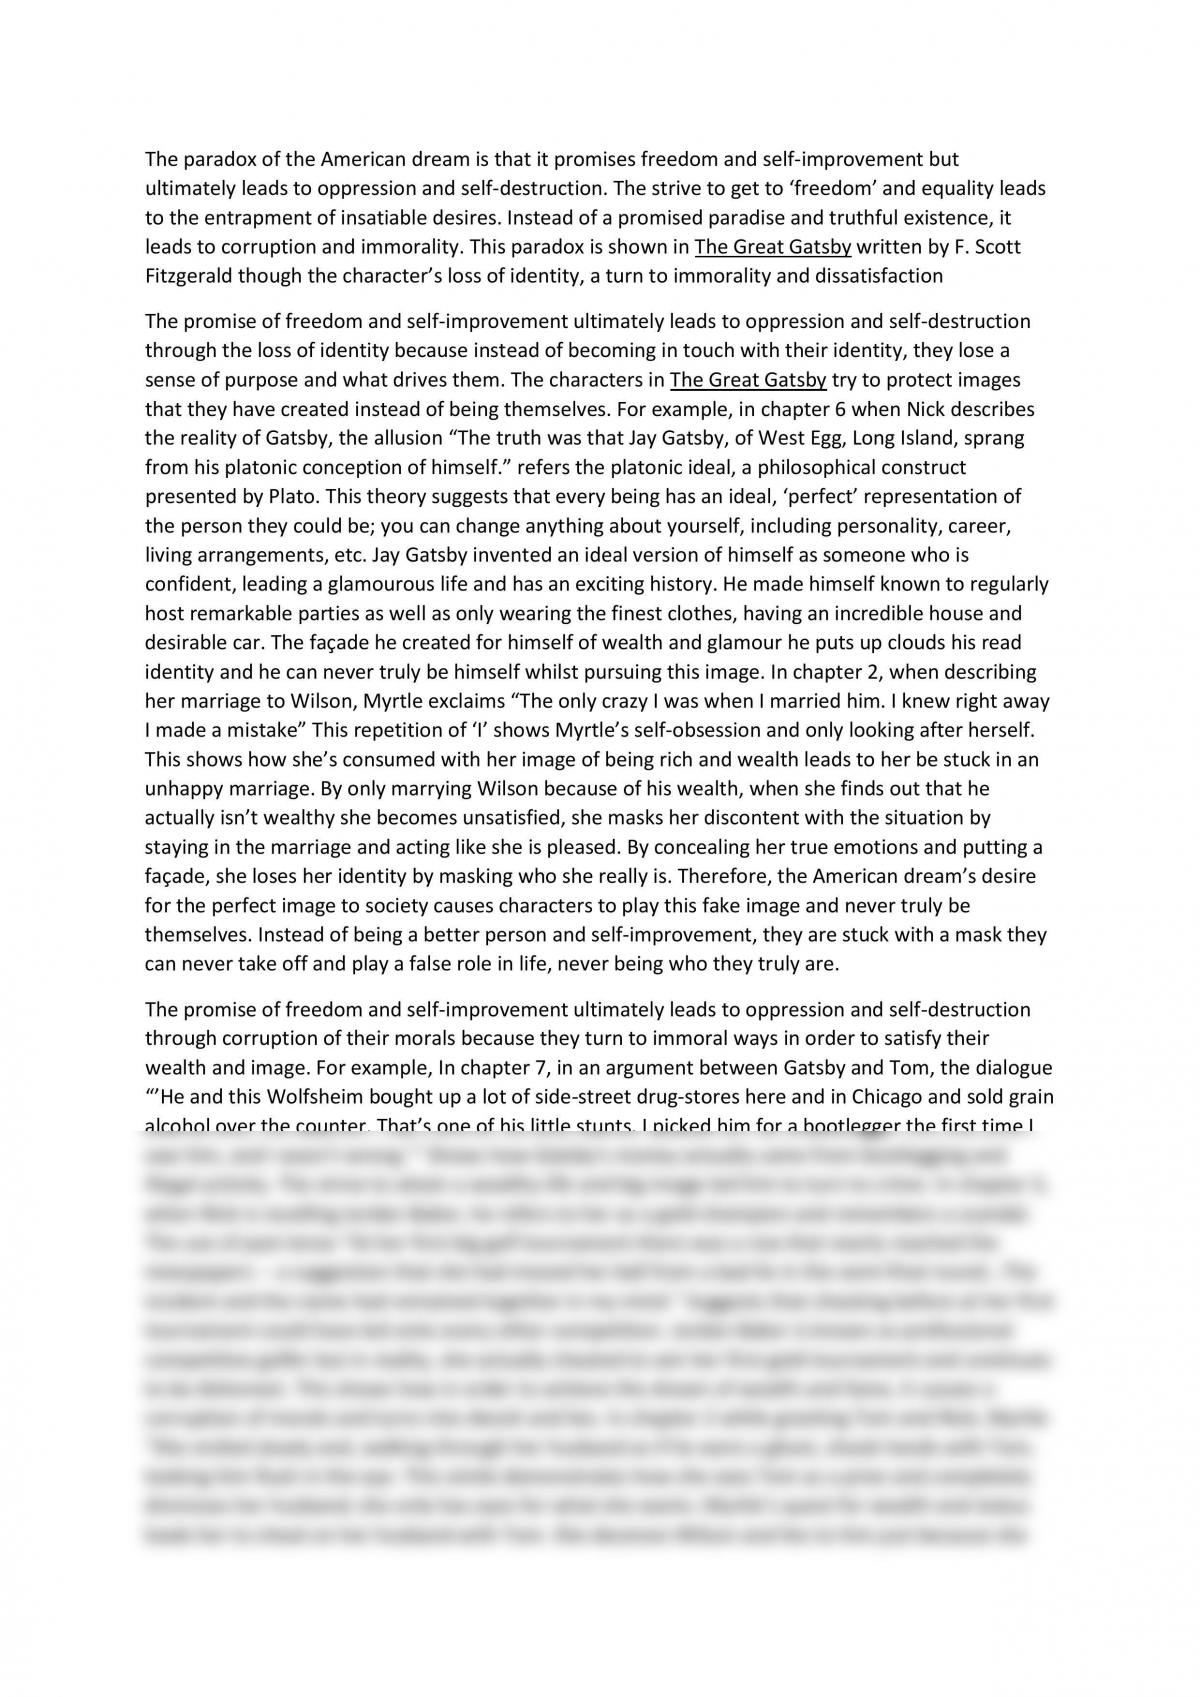 gatsby essay about the american dream